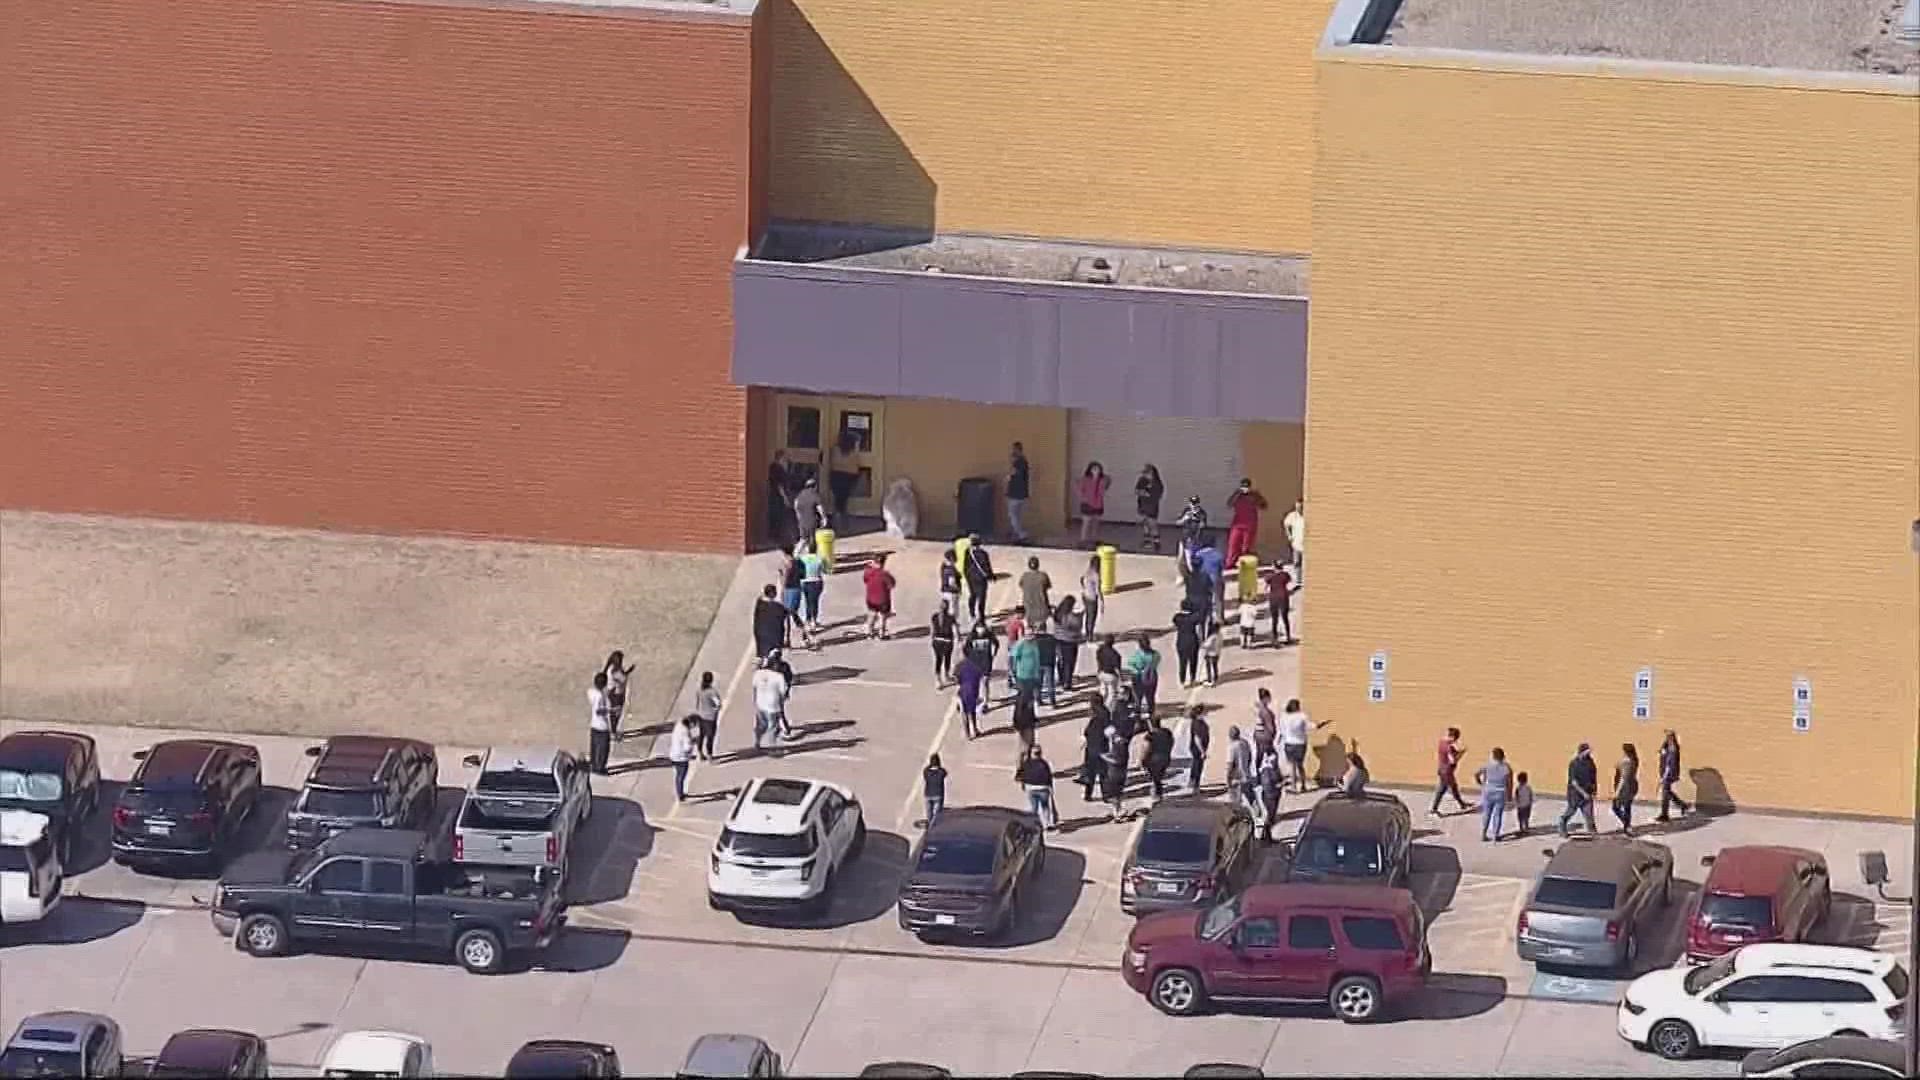 Administrators told WFAA that there was “no active threat” following a report of guns found at the school.